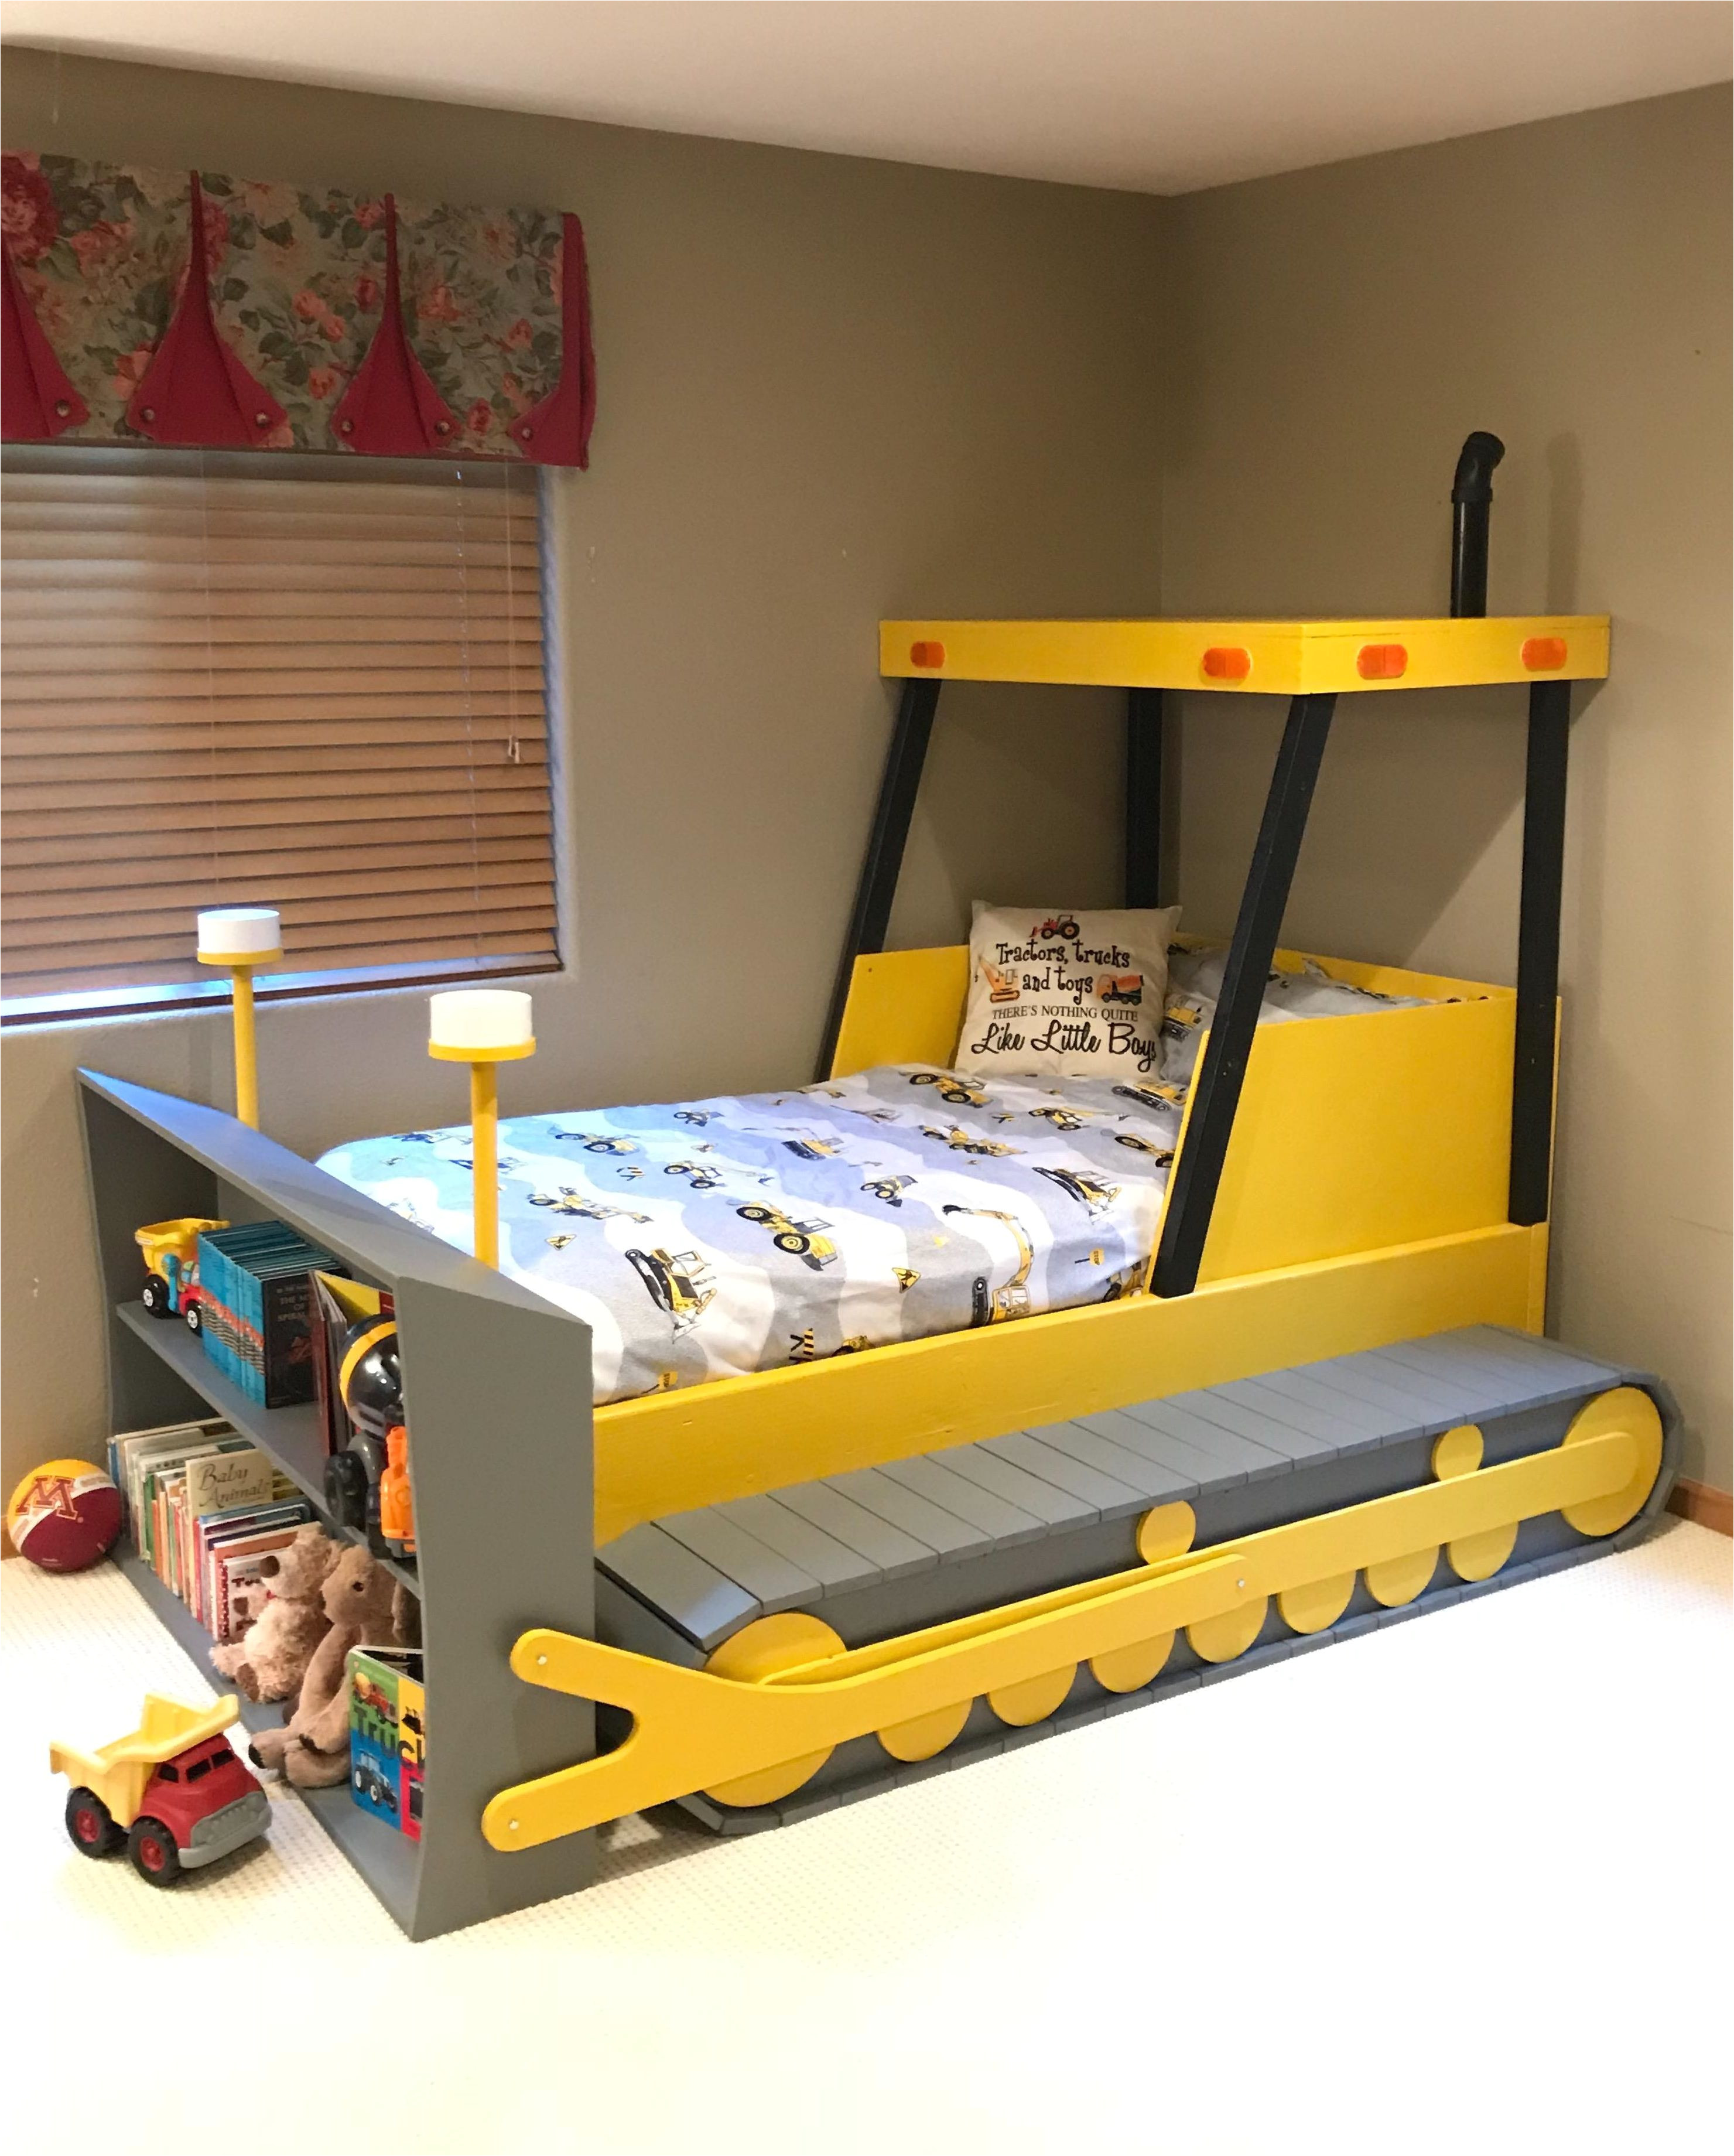 easy to follow bulldozer bed plans in downloadable pdf format a project you can build so your little one can transition to a big kid bed they will love to